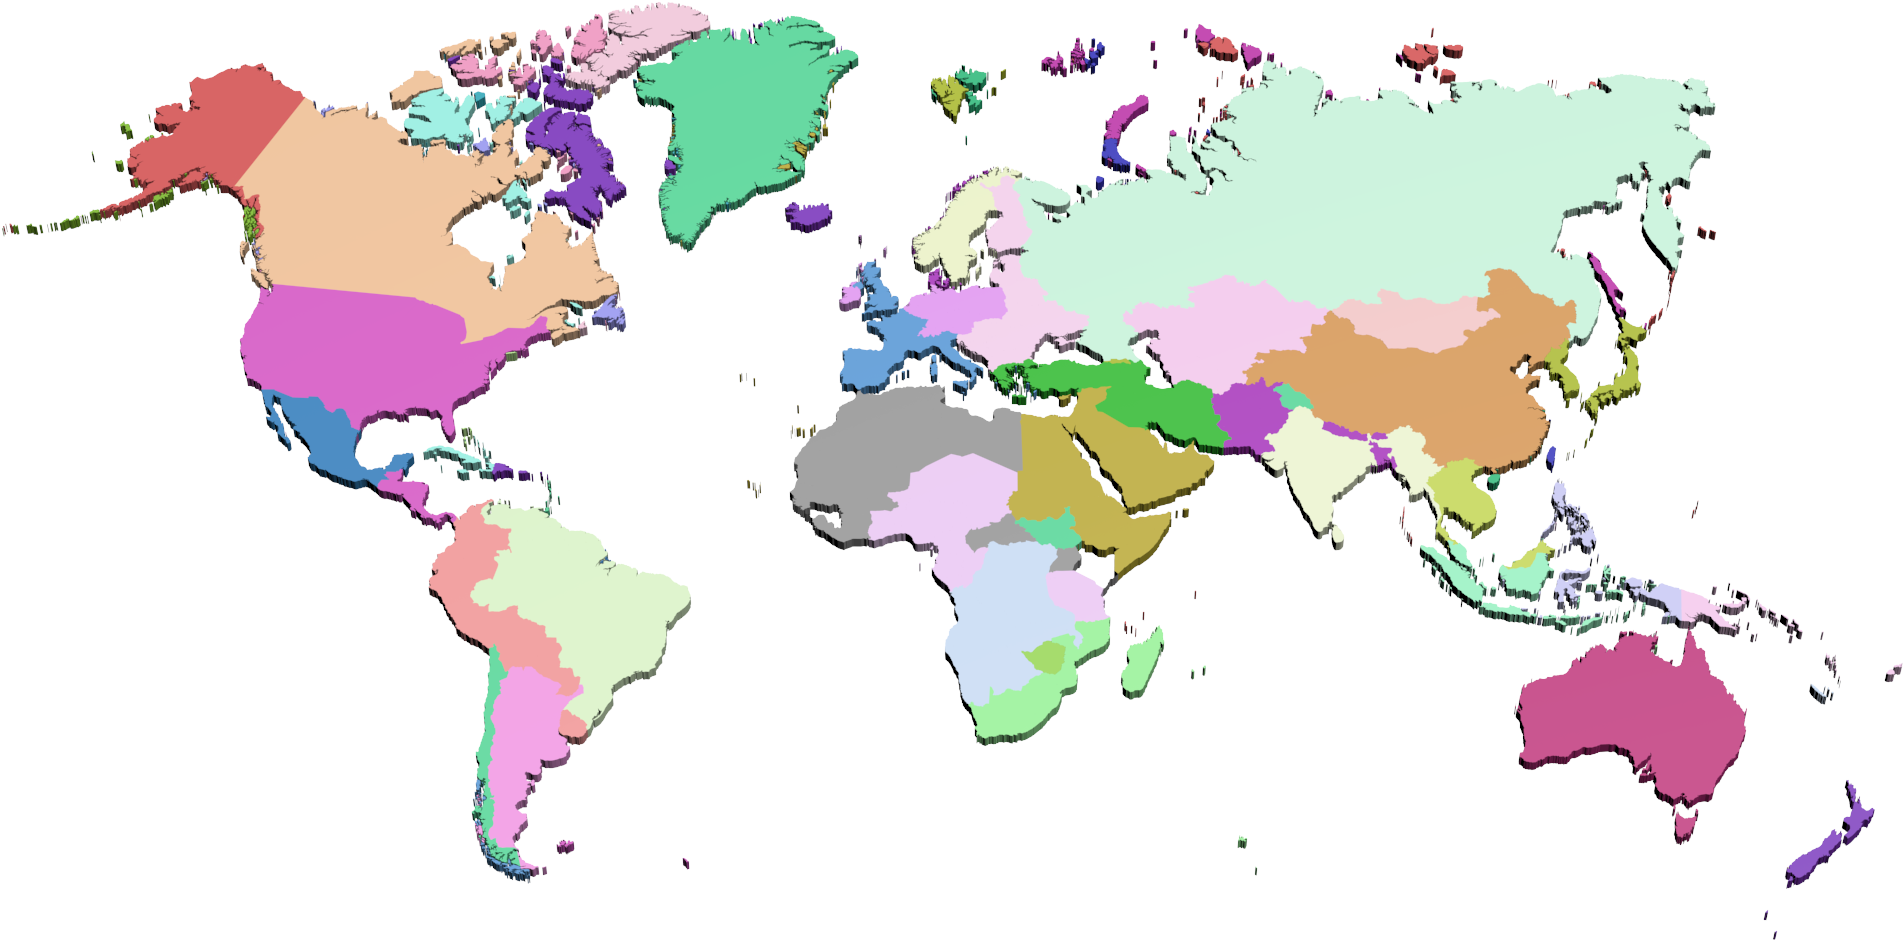 Colorful World Map Political Divisions